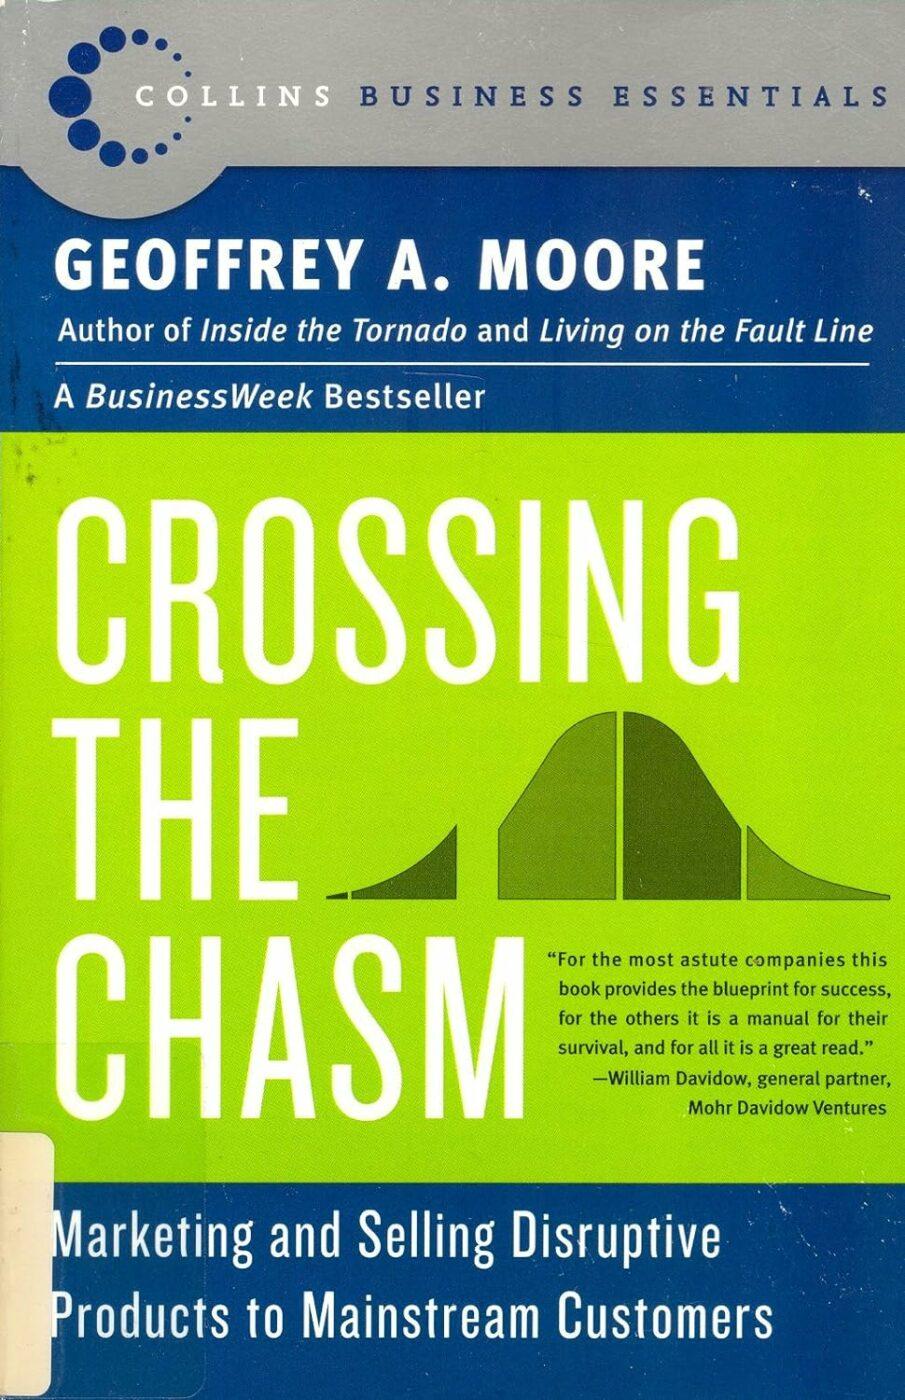 Crossing the Chasm: Marketing and Selling Technology Projects to Mainstream Customers by Geoffrey A. Moore